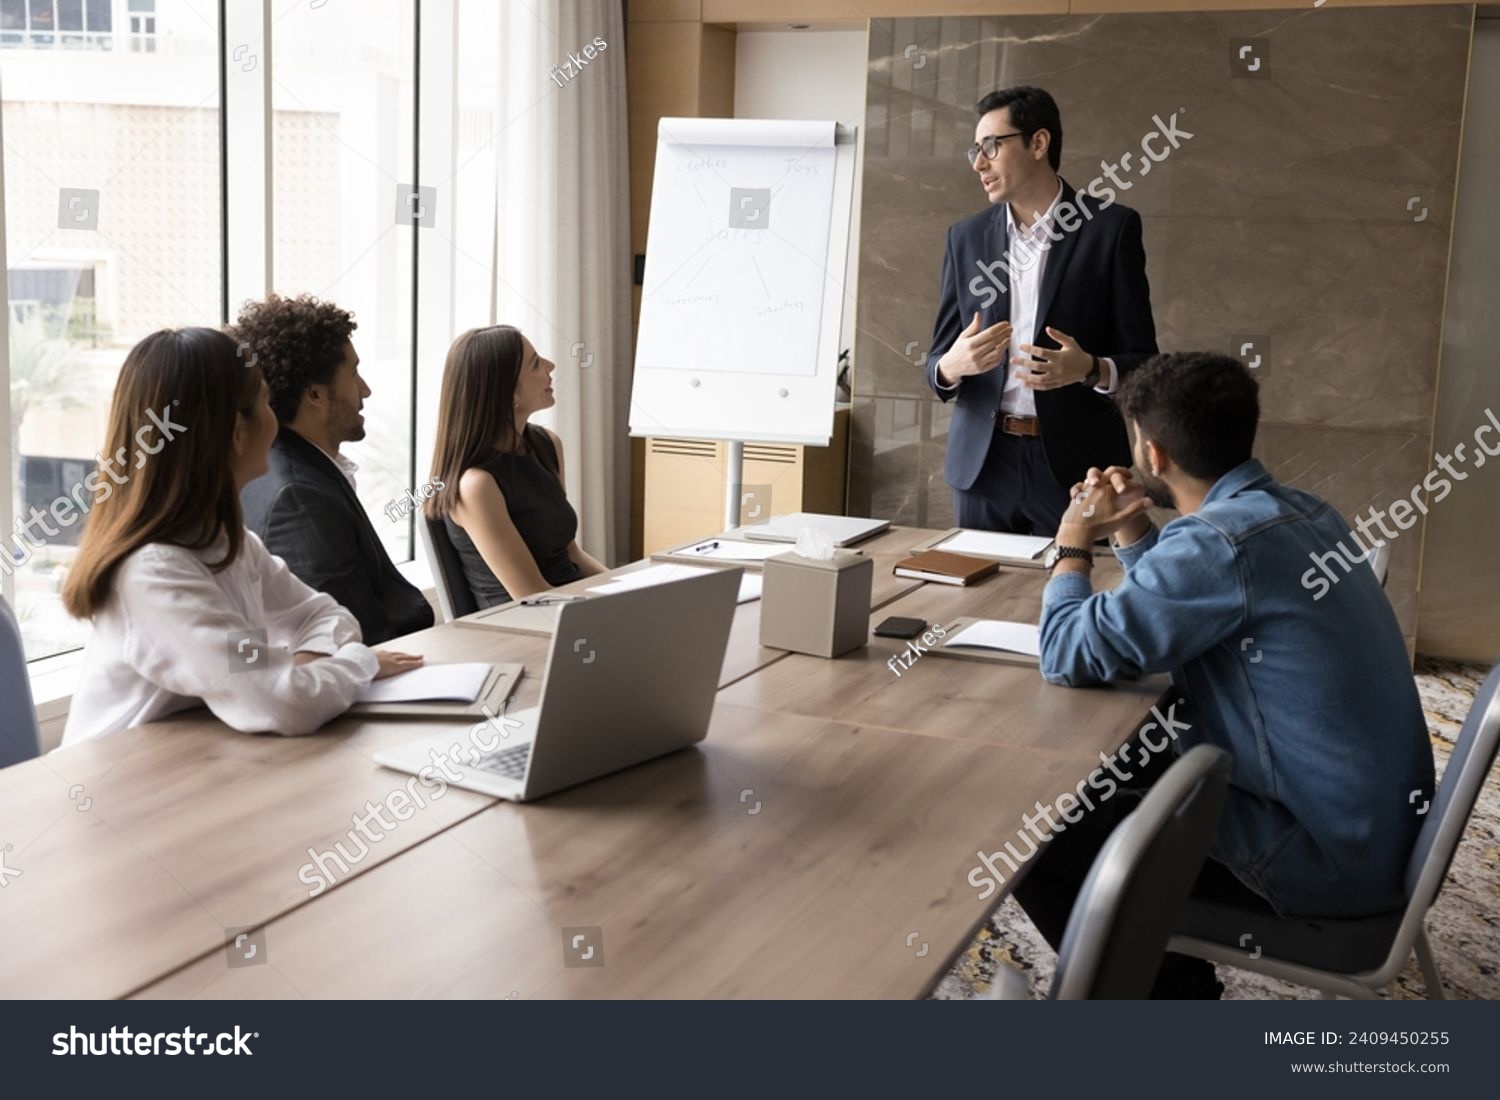 Serious young business leader man speaking to diverse team of colleagues, standing at meeting table, telling project plan, management strategy, ideas for brainstorming #2409450255